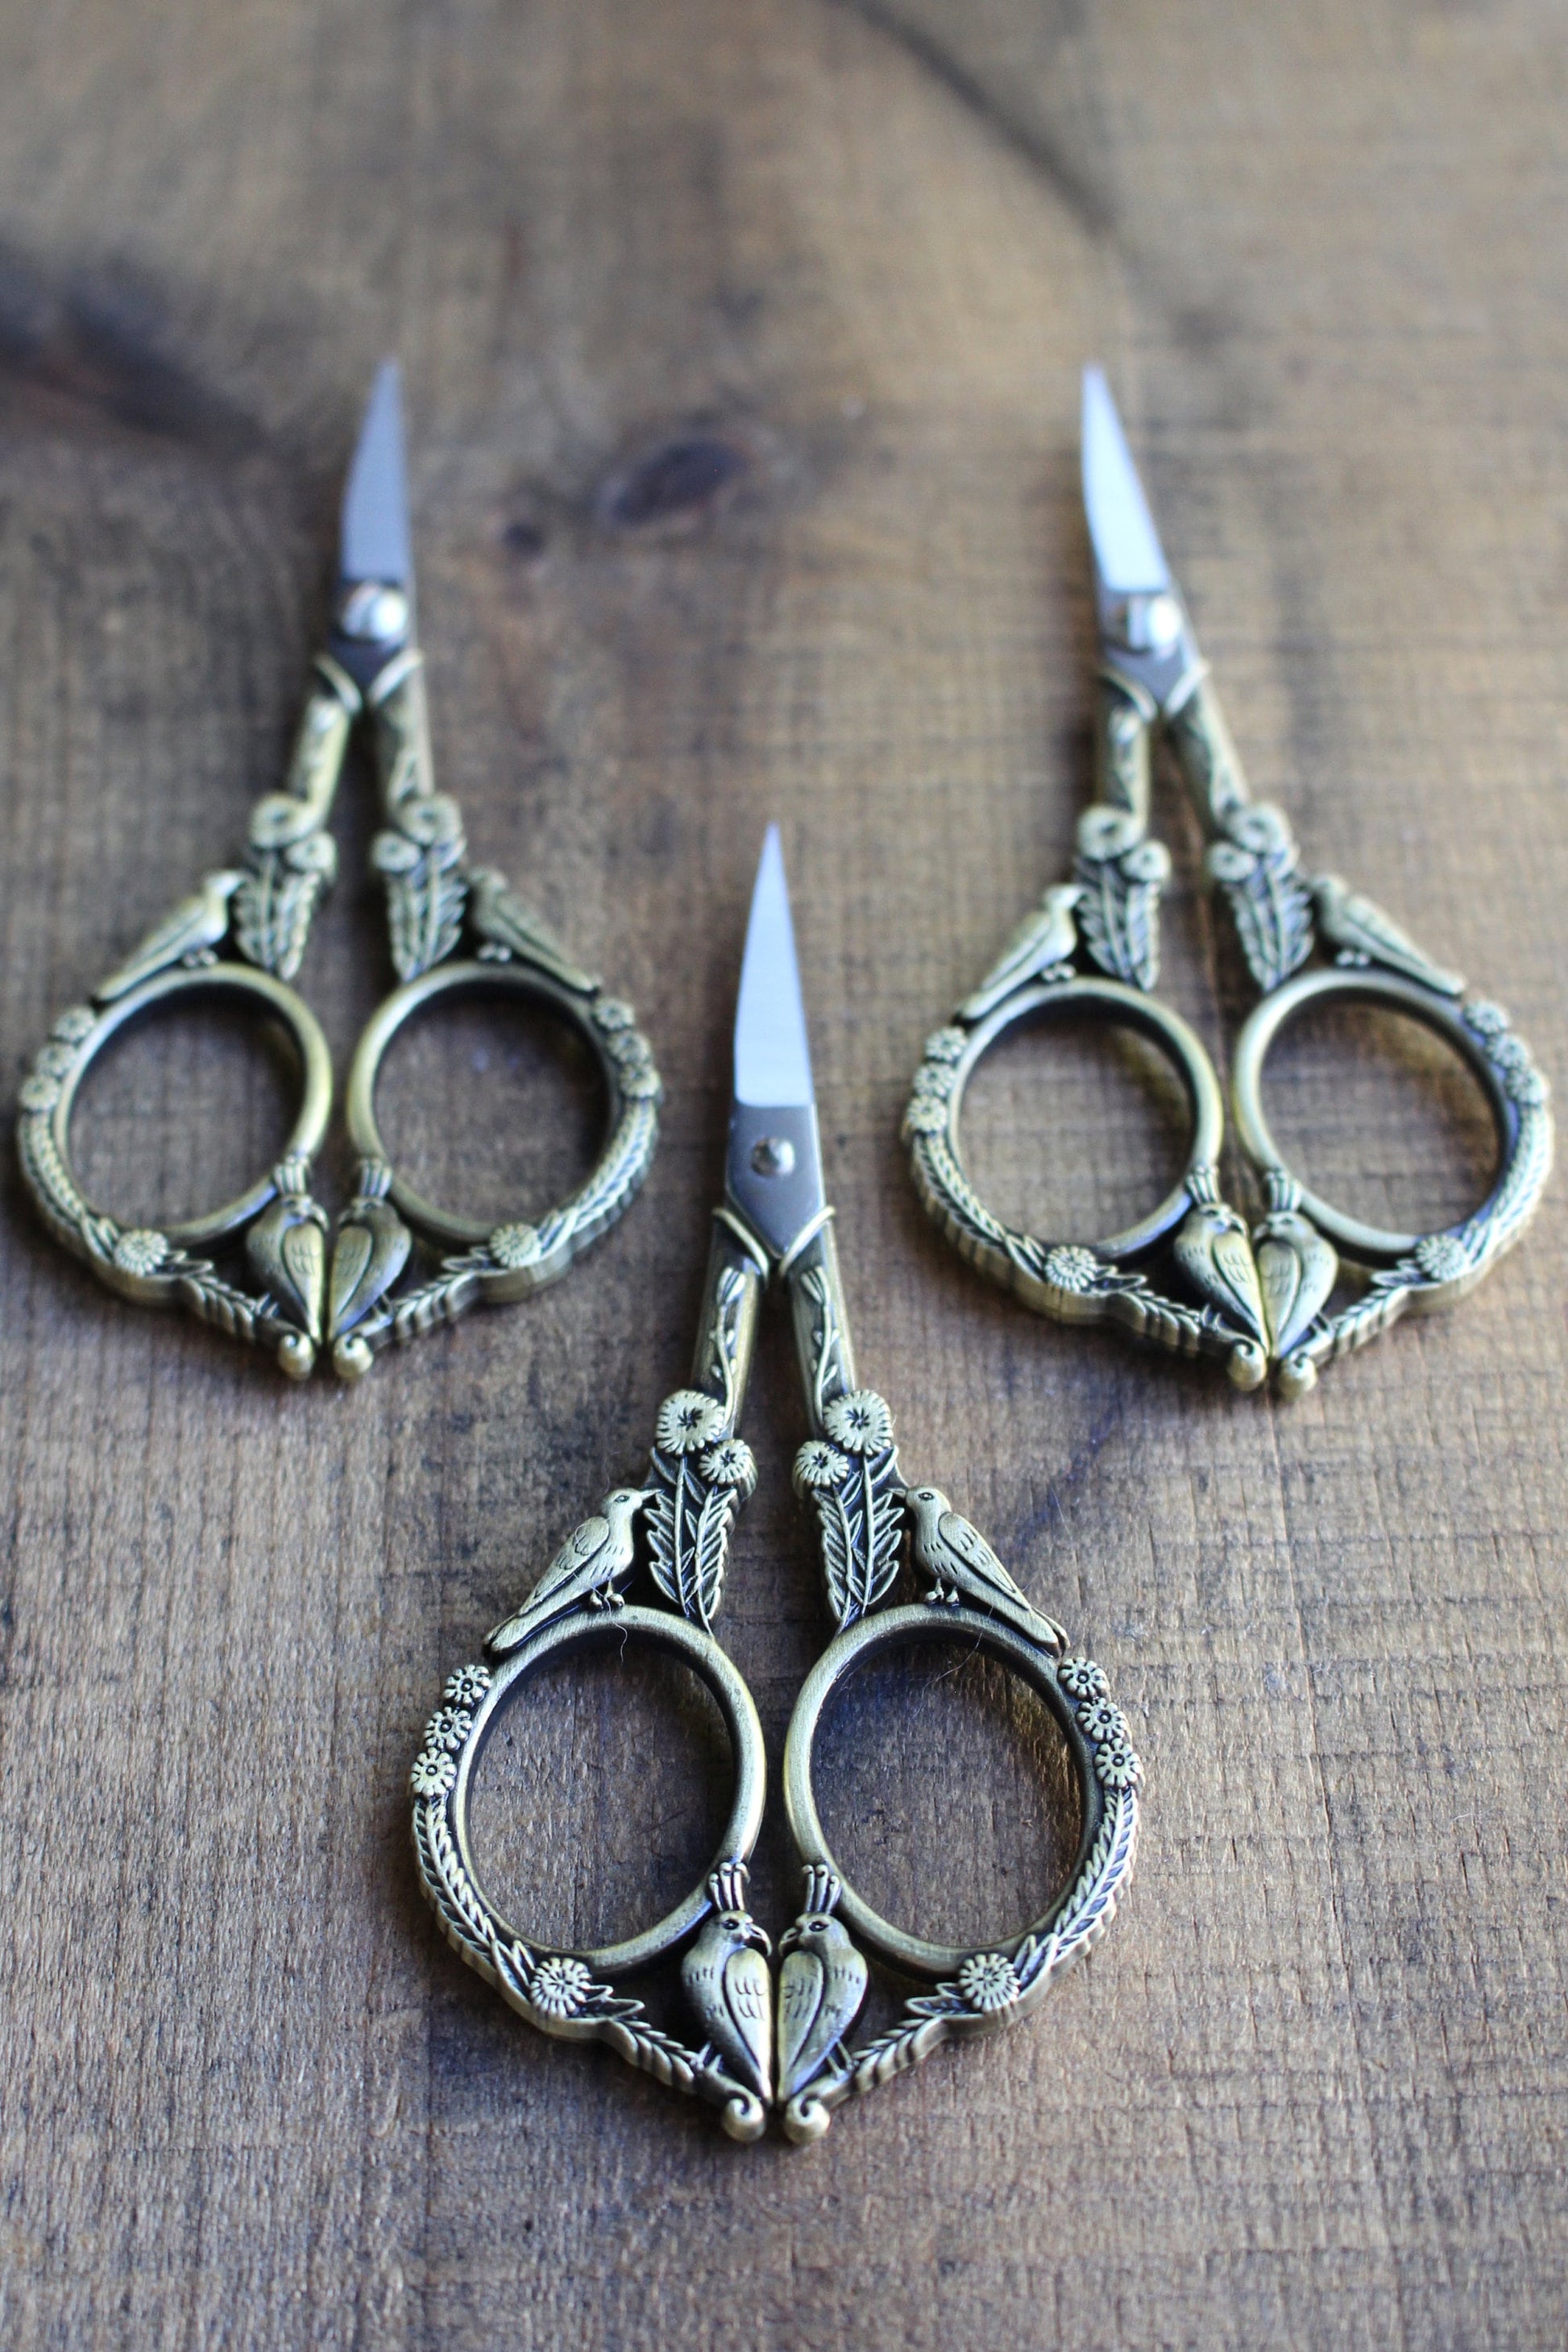 Feathered Friends Embroidery Scissors in antique gold